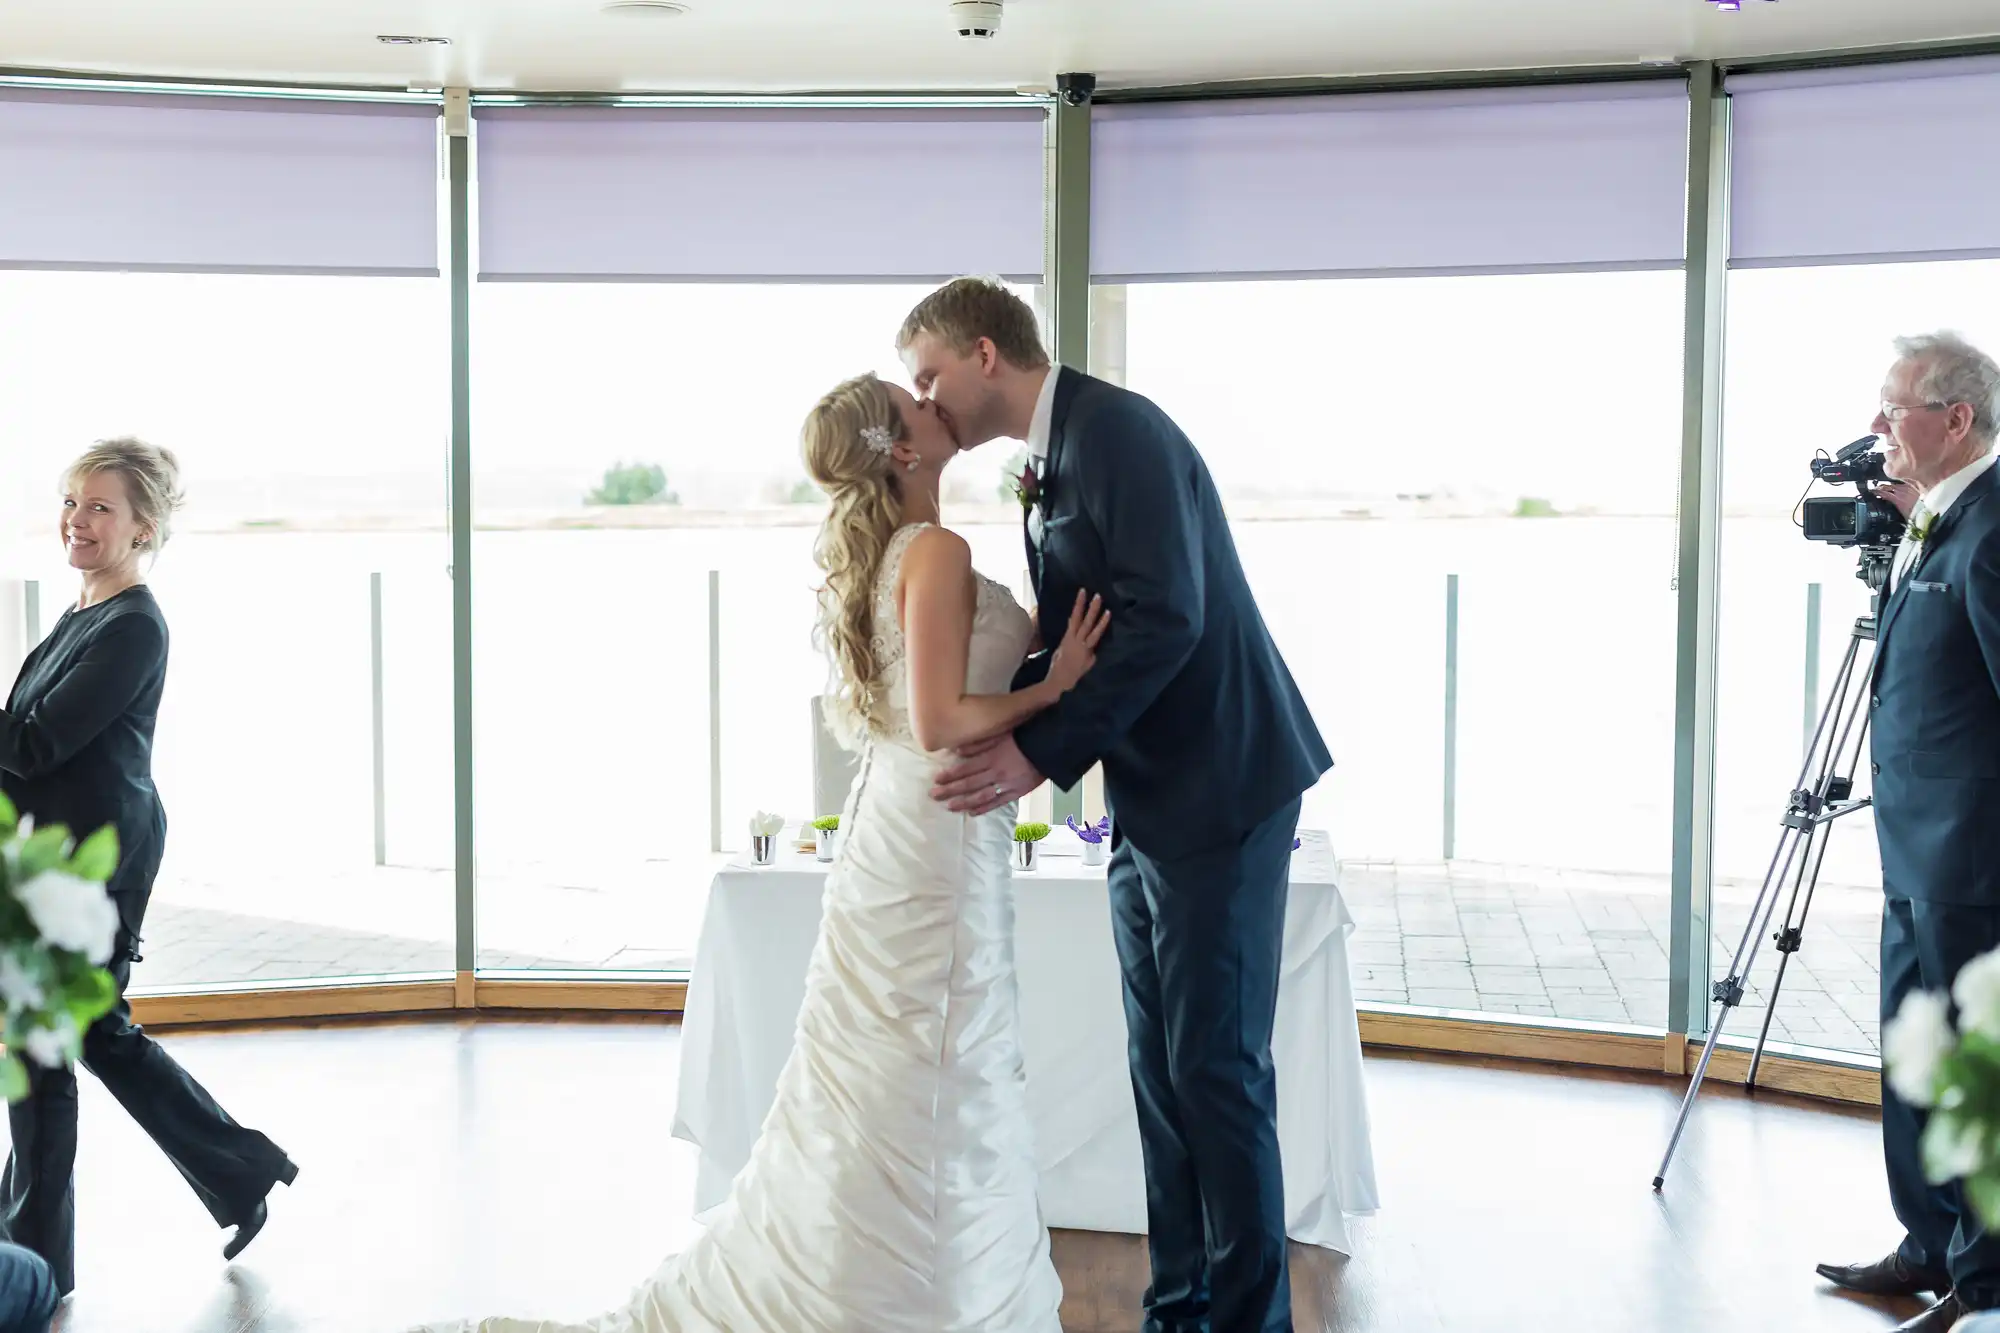 A bride and groom kissing in a room with large windows, while a photographer captures the moment and a woman watches smiling.